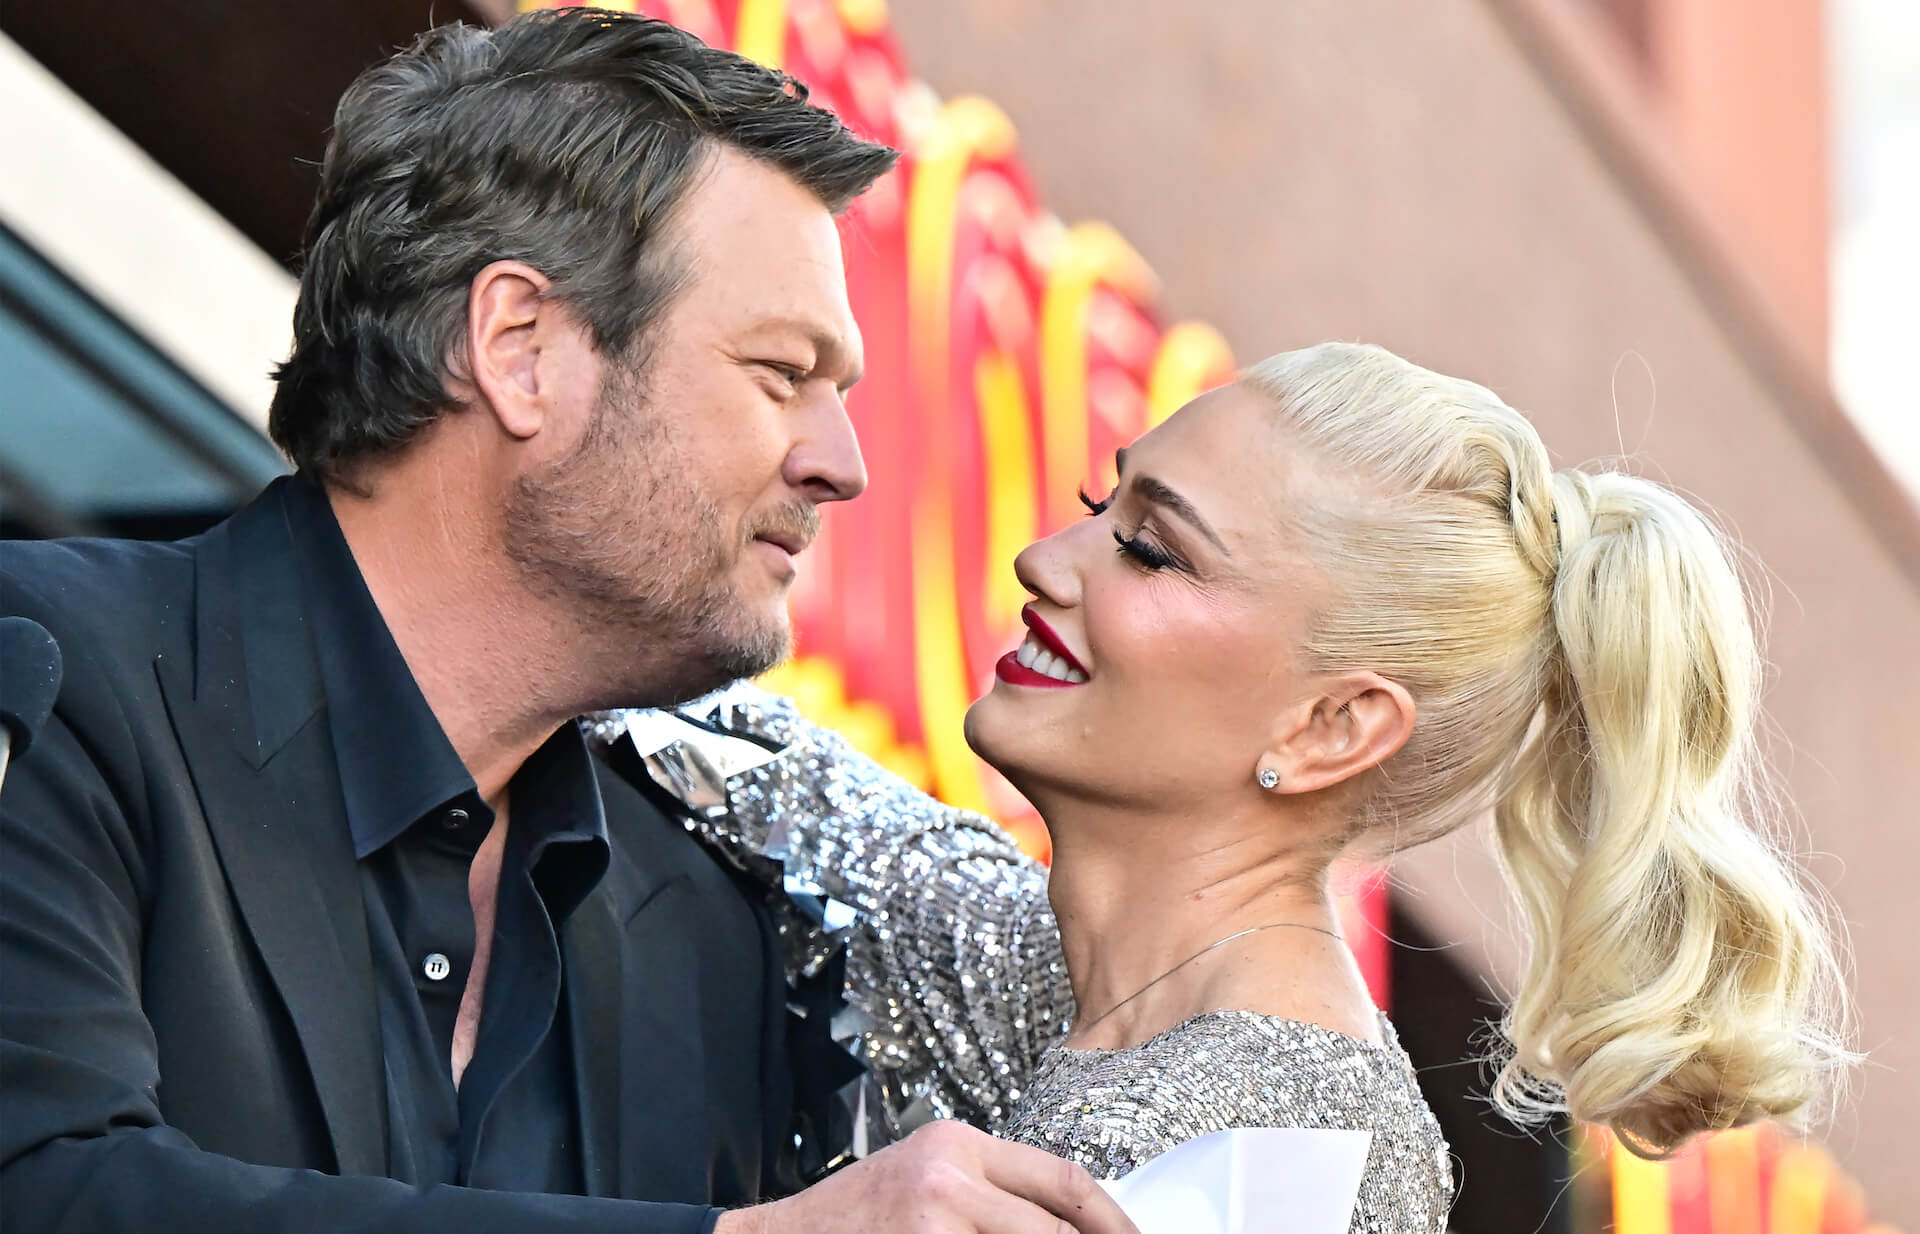 A close-up of Blake Shelton and Gwen Stefani embracing and looking into each other's eyes